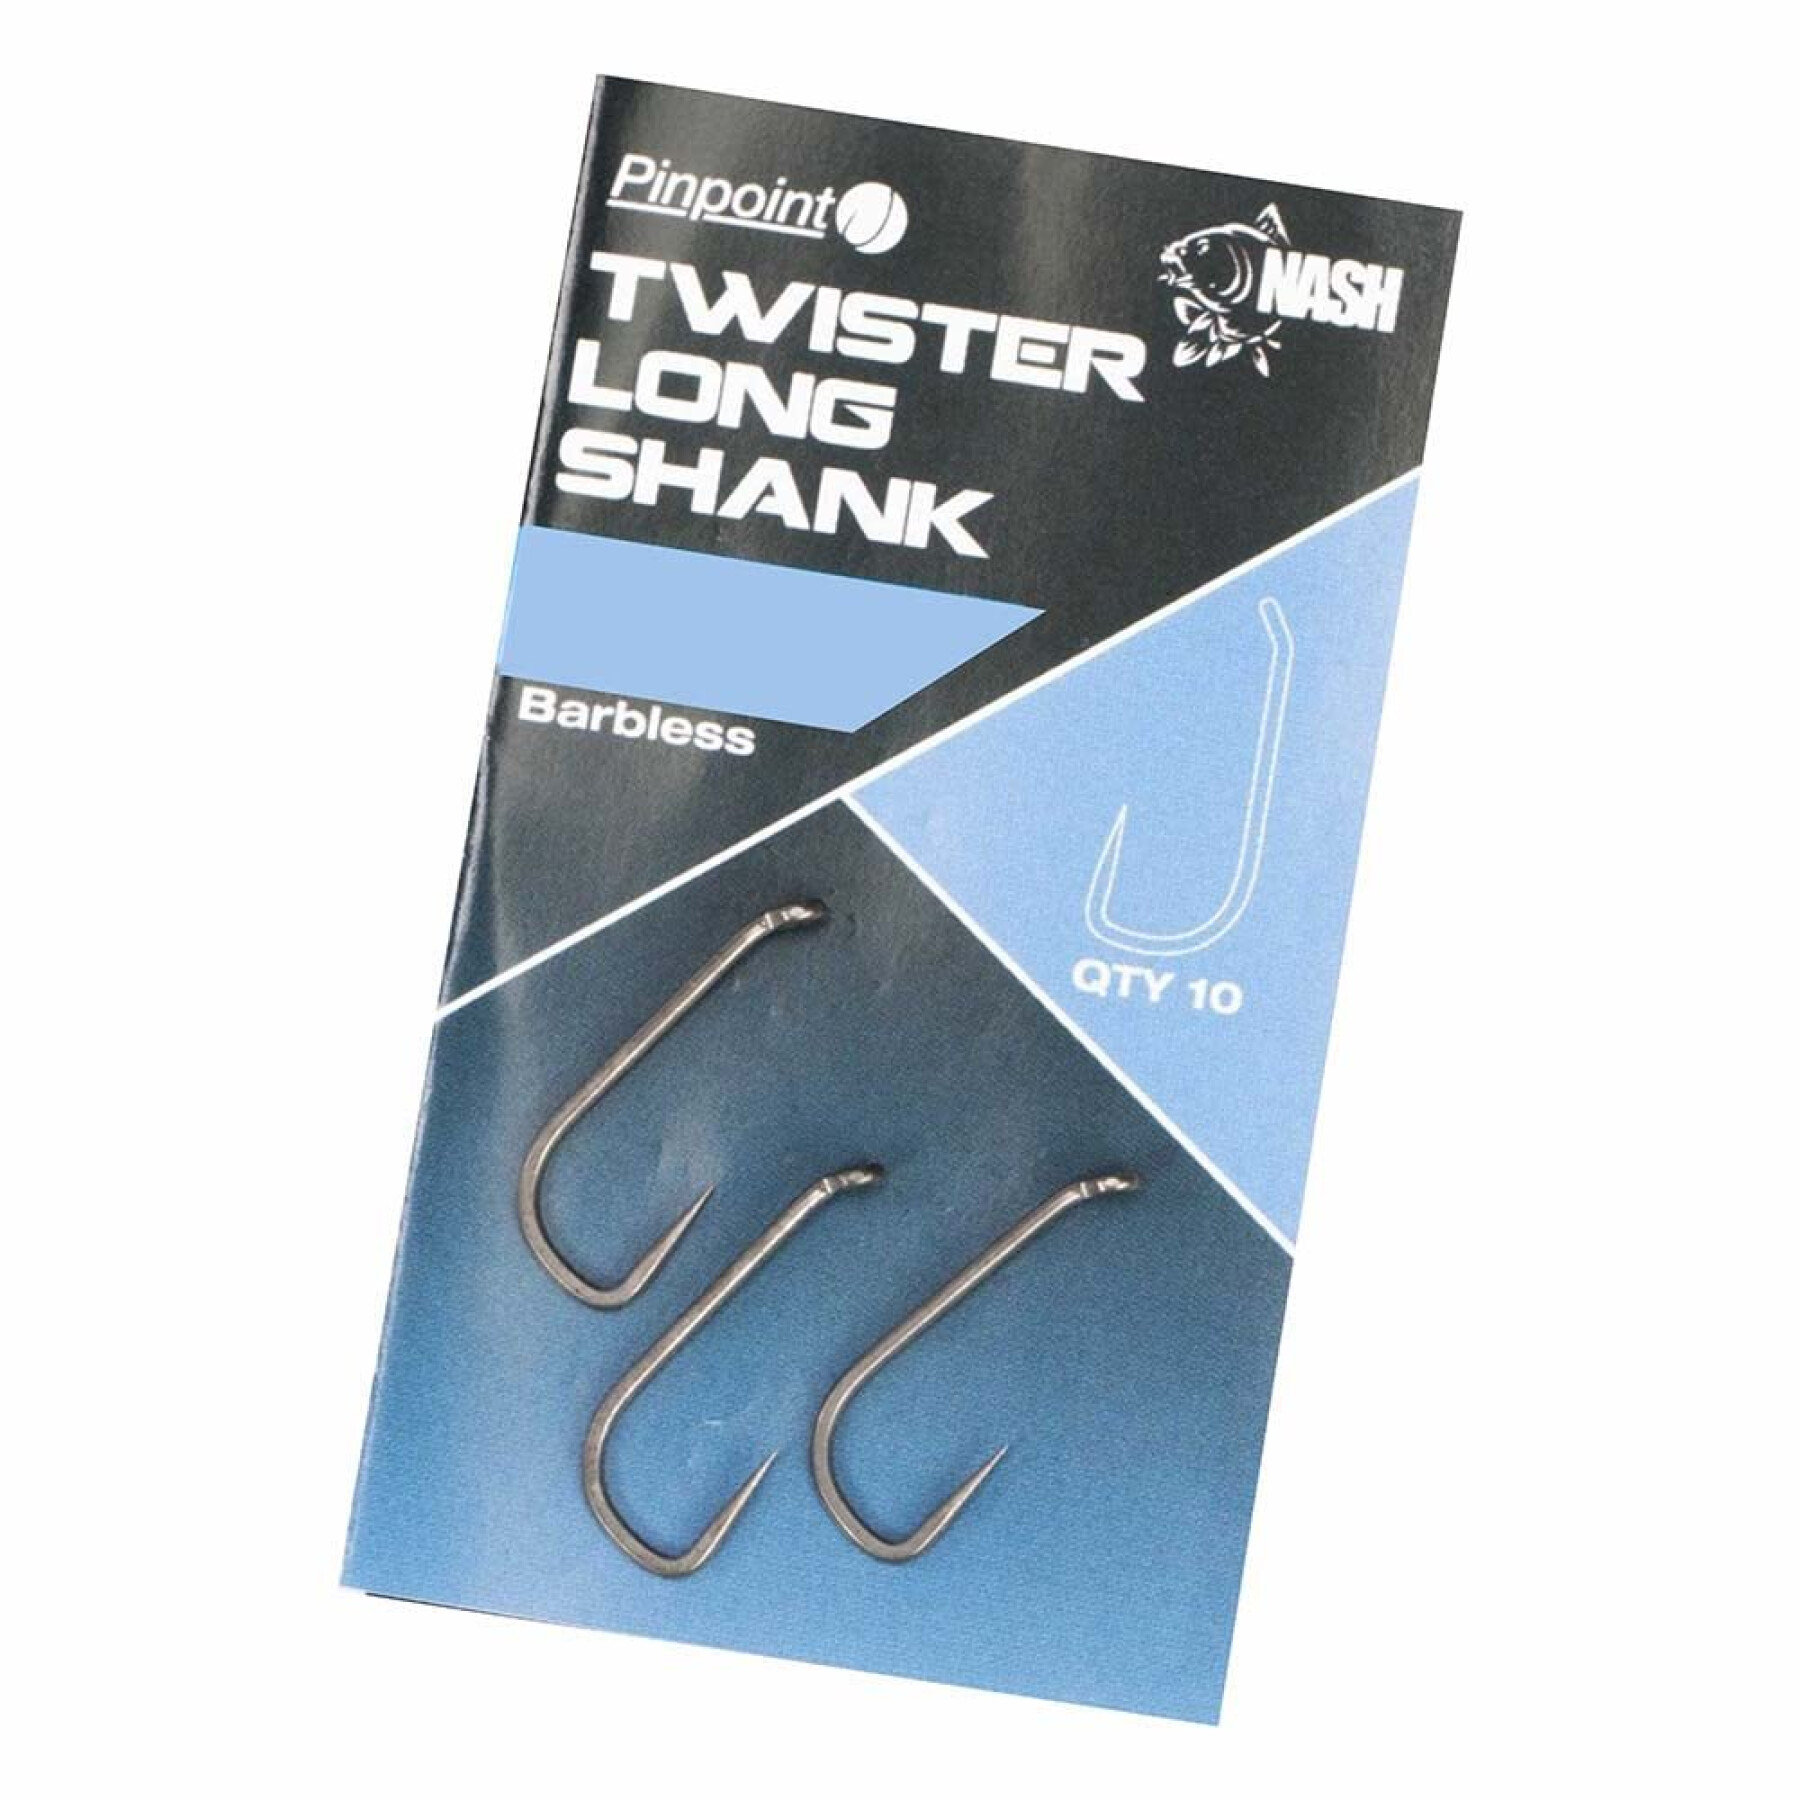 Hak Pinpoint twister long shank taille 6 Micro Barbed